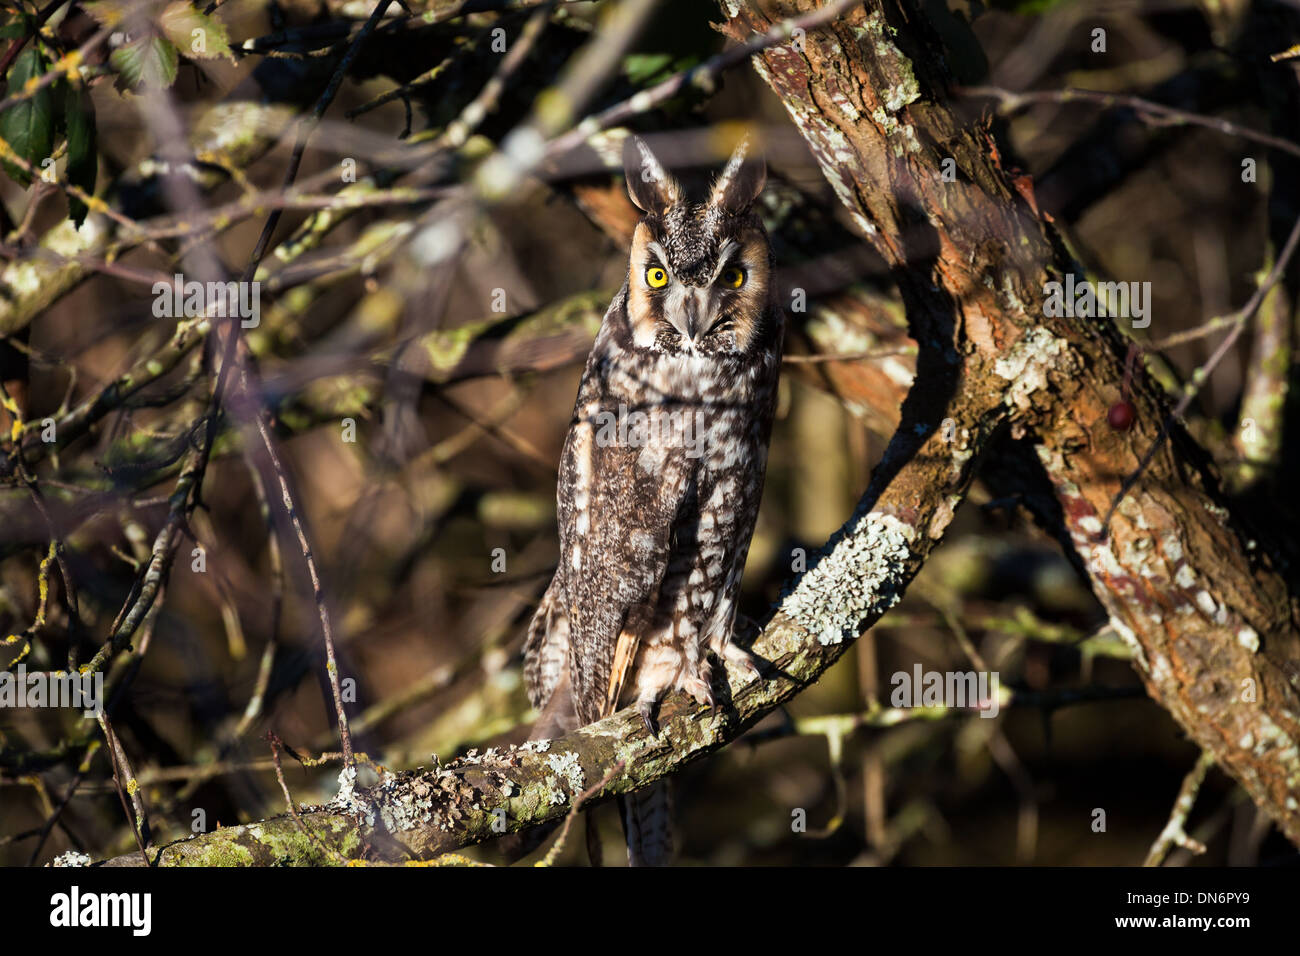 long eared owl and well Camouflage Stock Photo